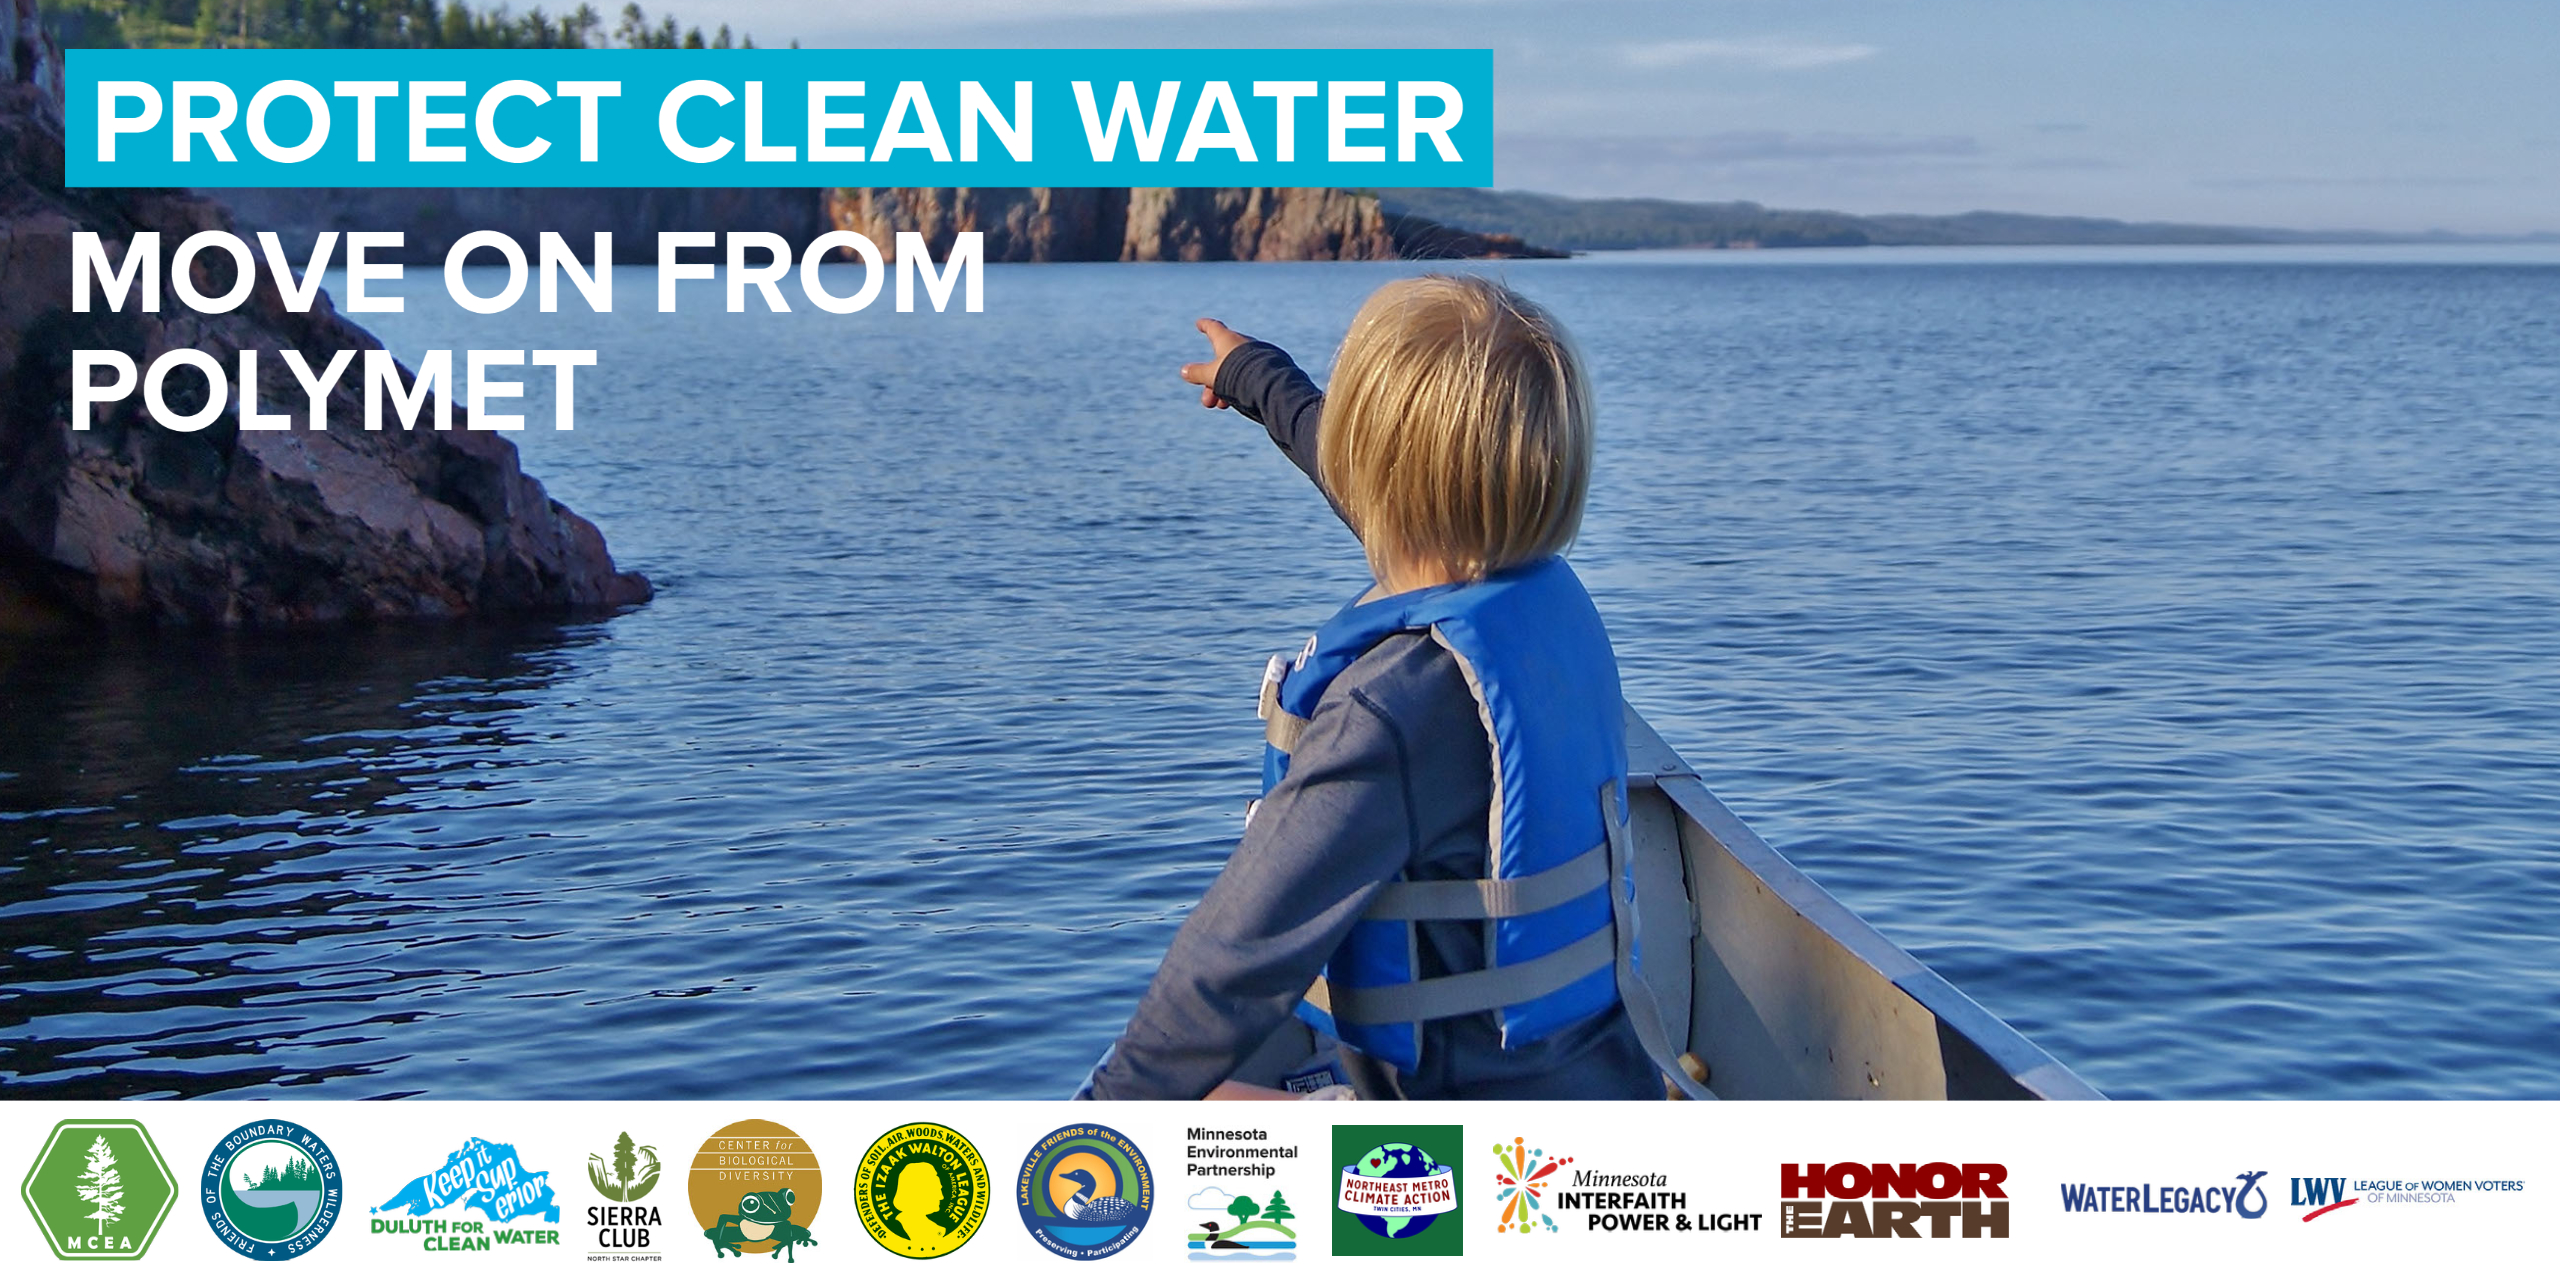 image: pointing at shore of Lake Superior and logos of partner orgs. Text: protect clean water move on from polymet